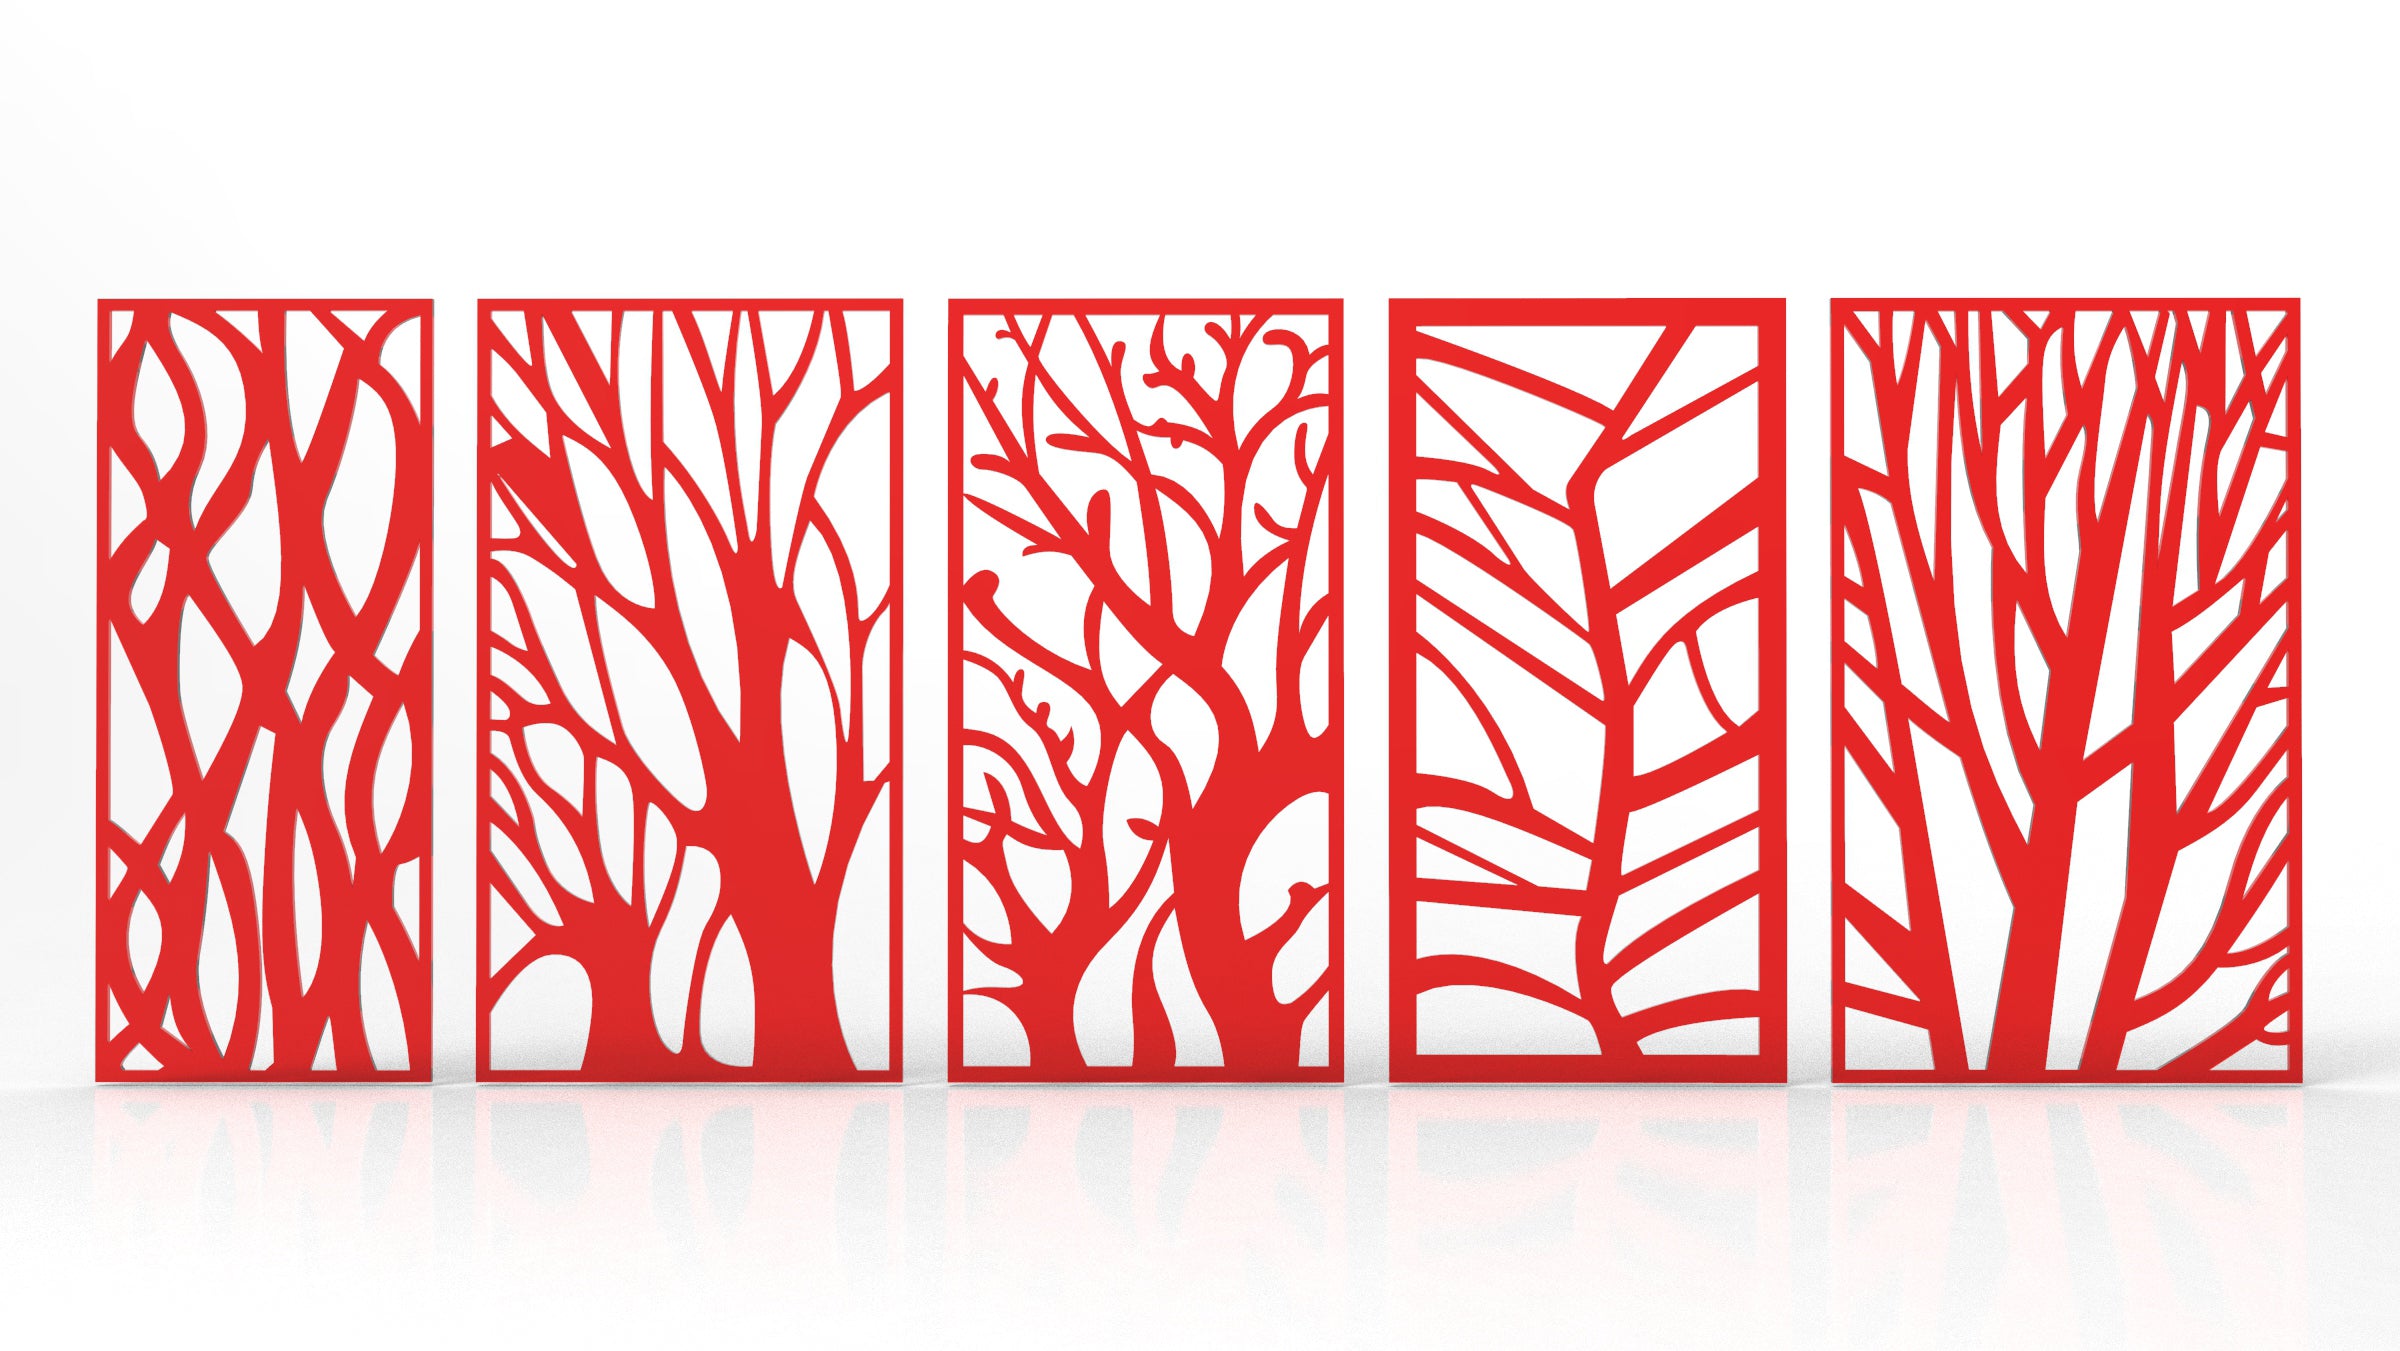 Tree Ornaments for decorative partitions panel screen CNC Laser Cutting File | SVG, DXF, AI |#C015|